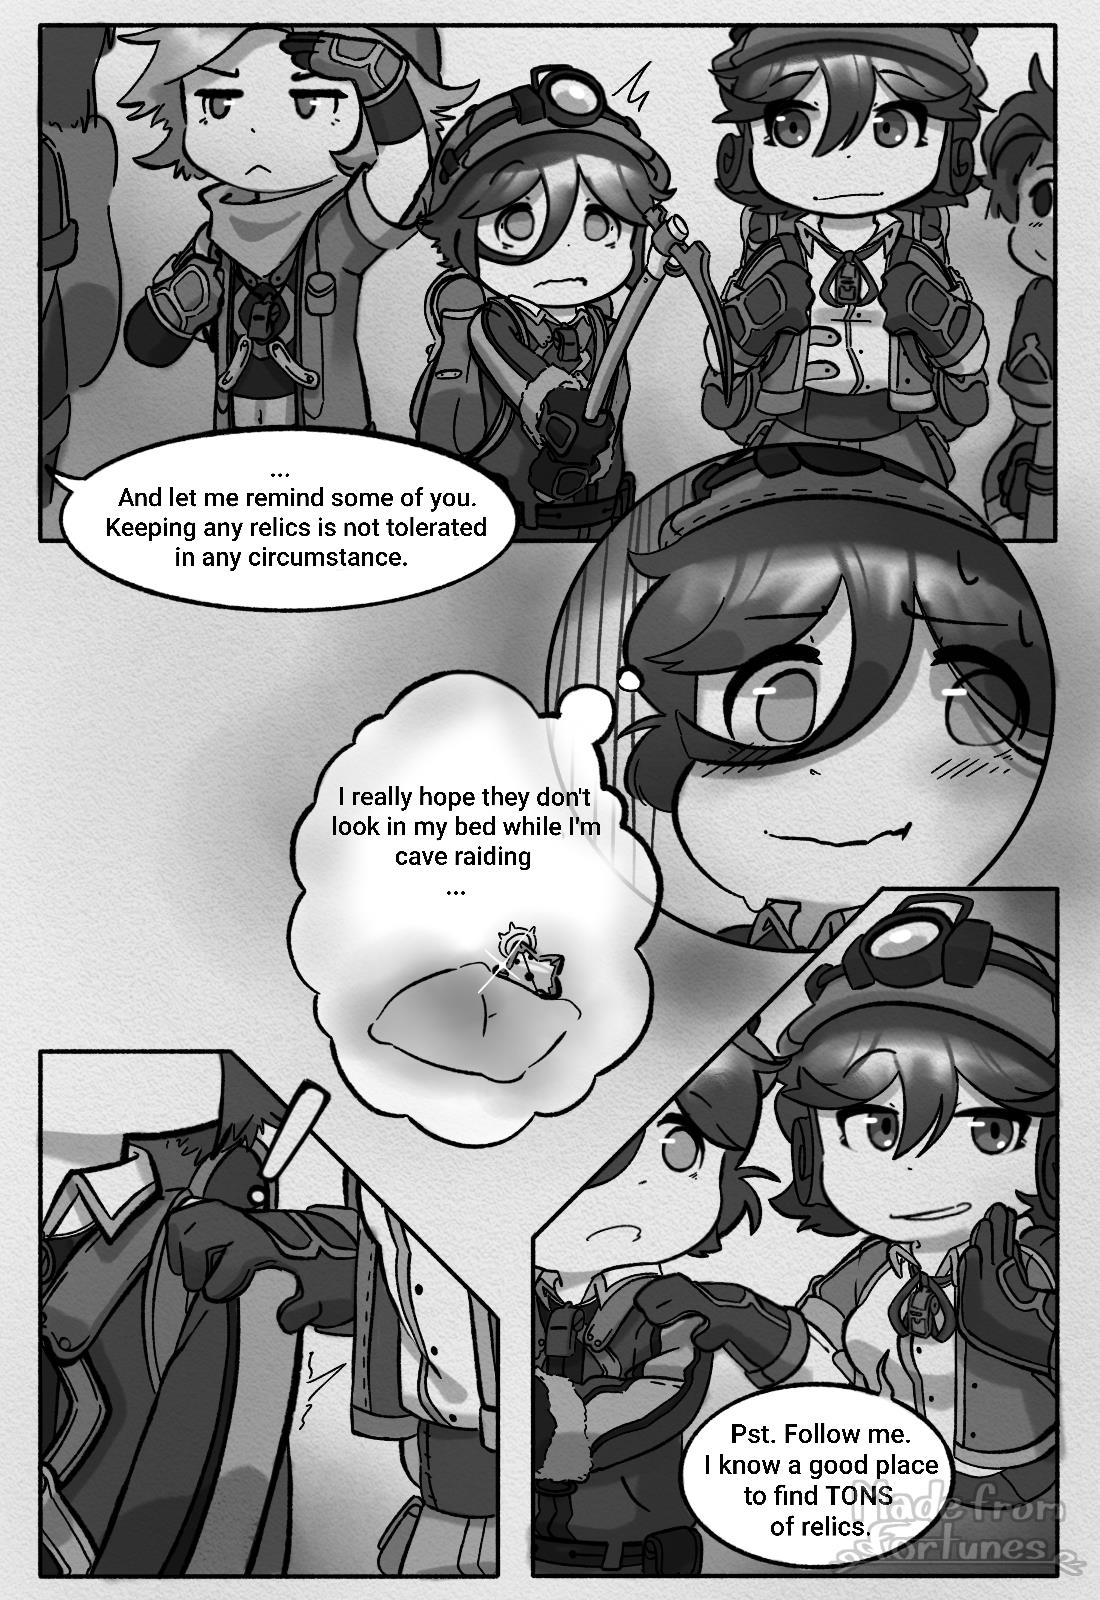 Made From Fortunes (Made In Abyss Fanmade Comic) - Page 2